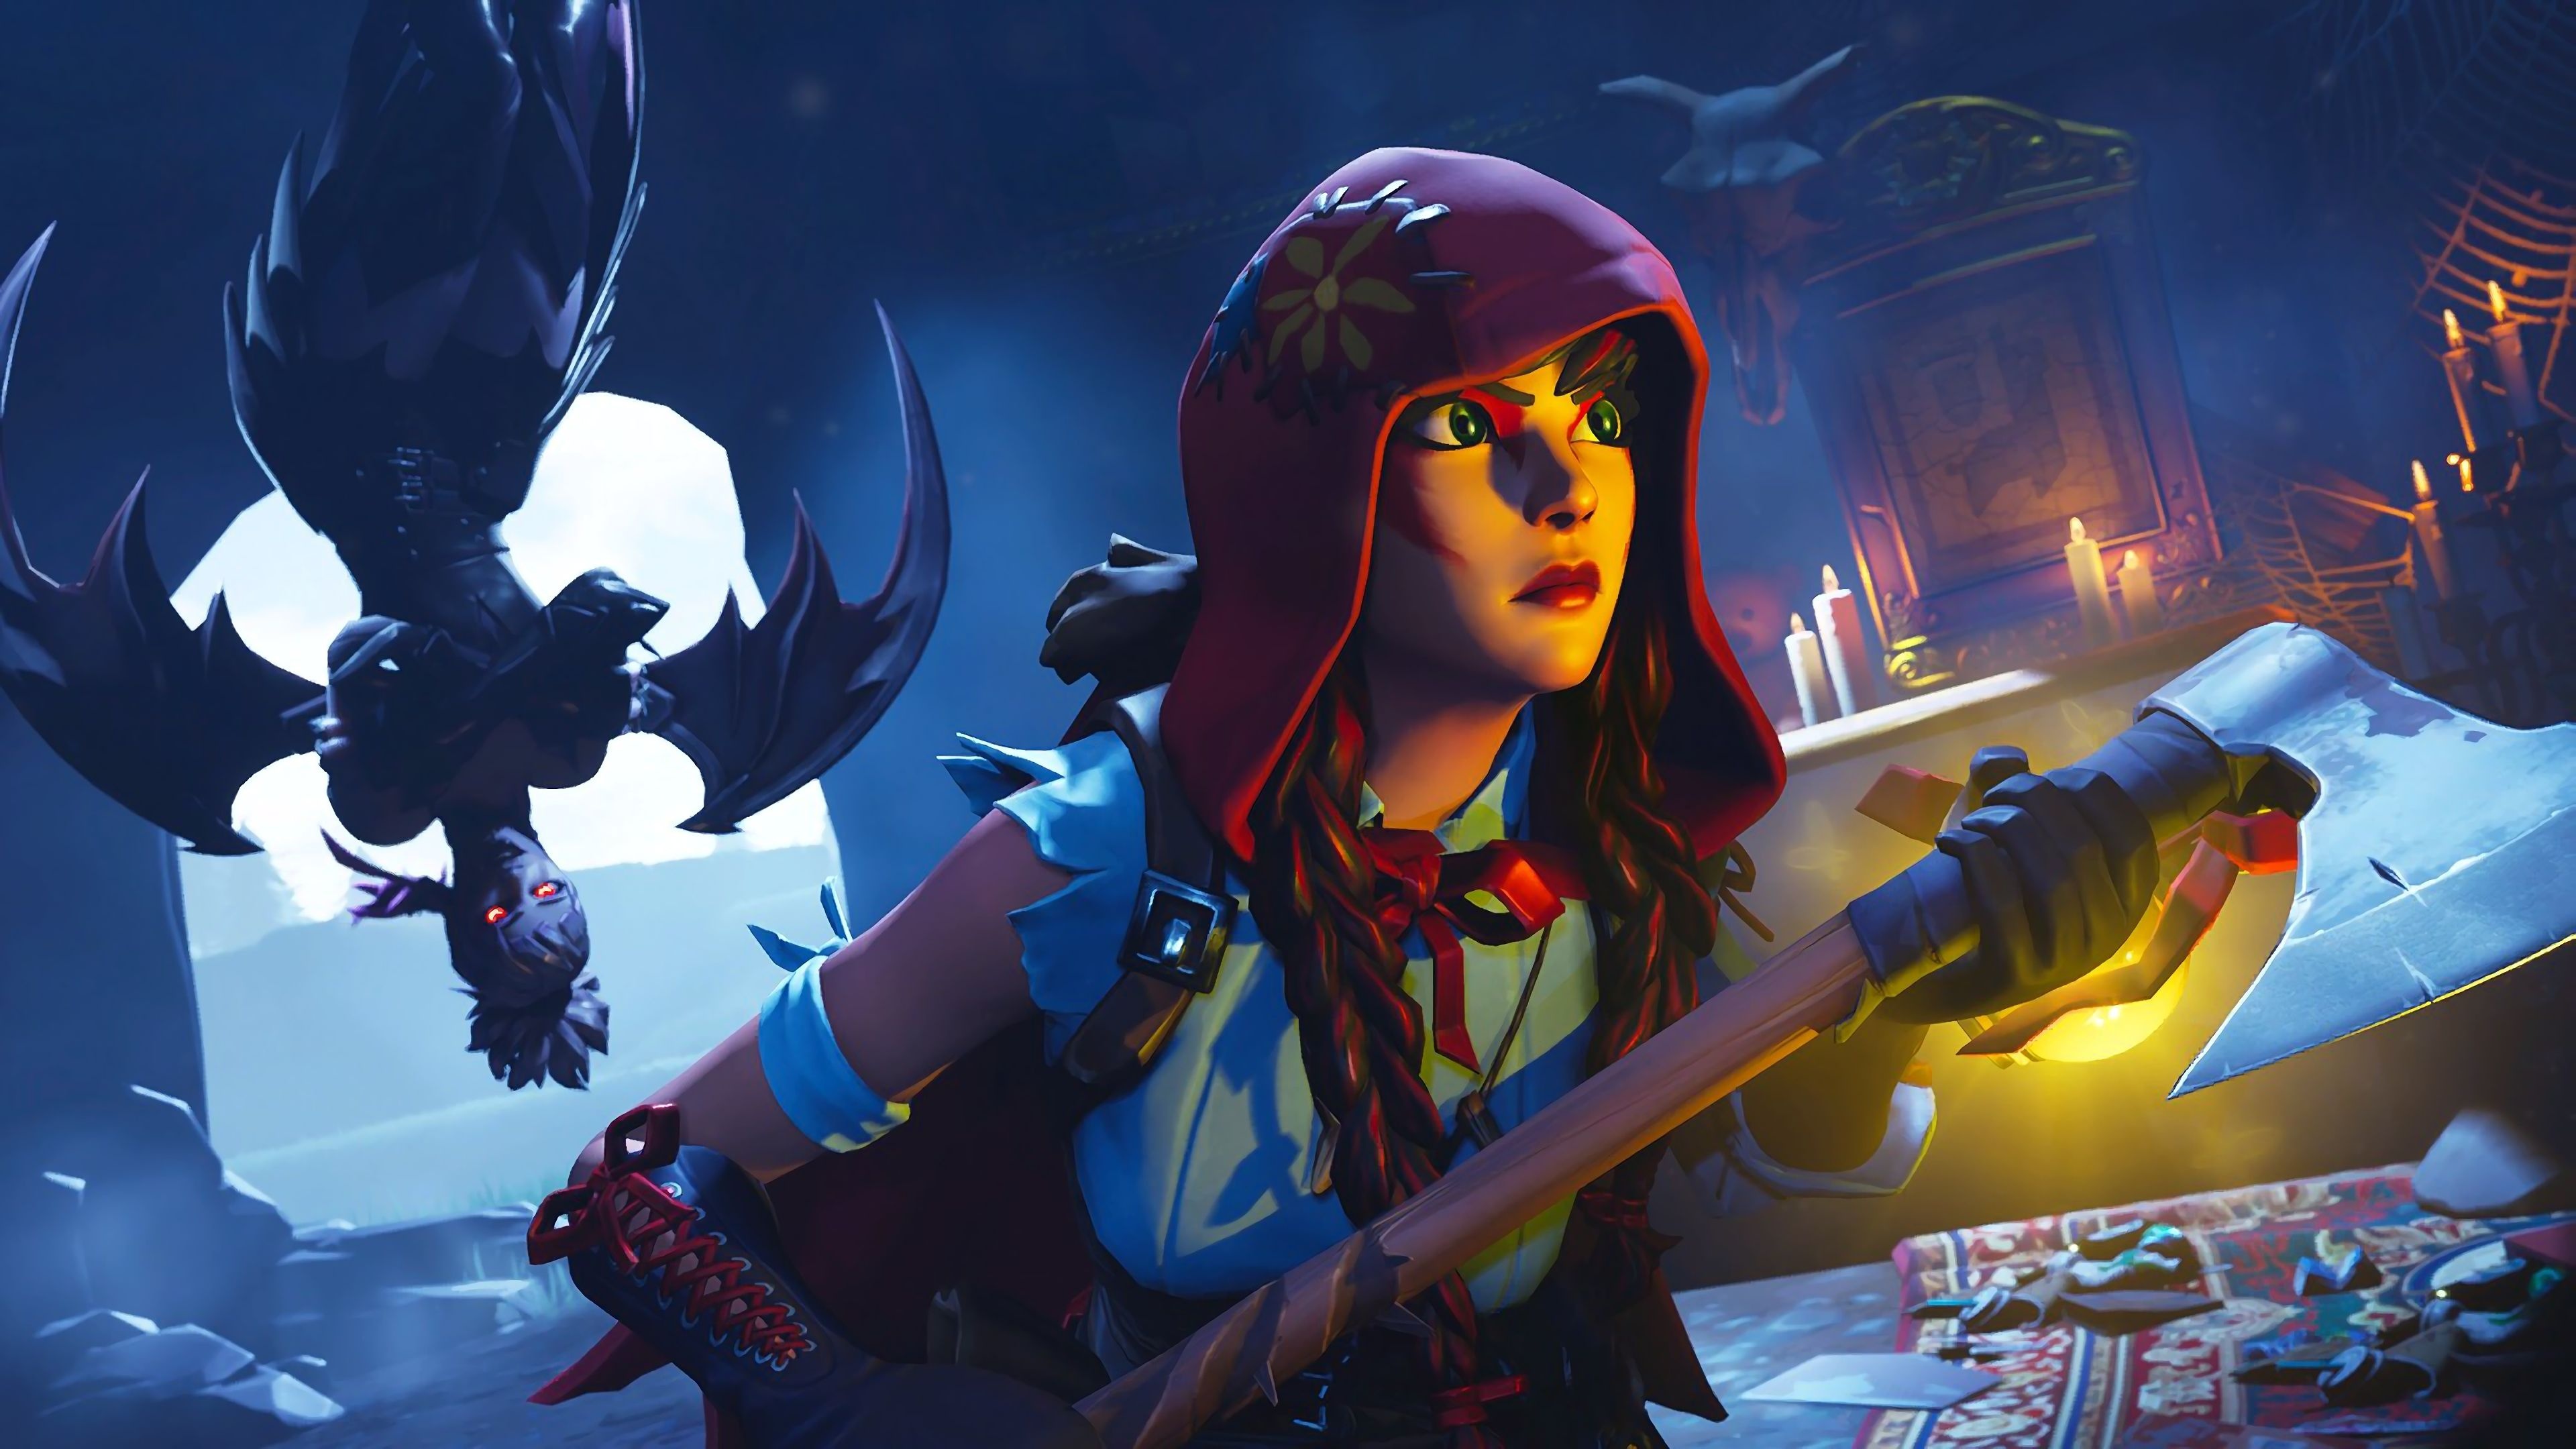 Epic Games, Gaming industry, Fortnite wallpapers, High-definition graphics, 3840x2160 4K Desktop